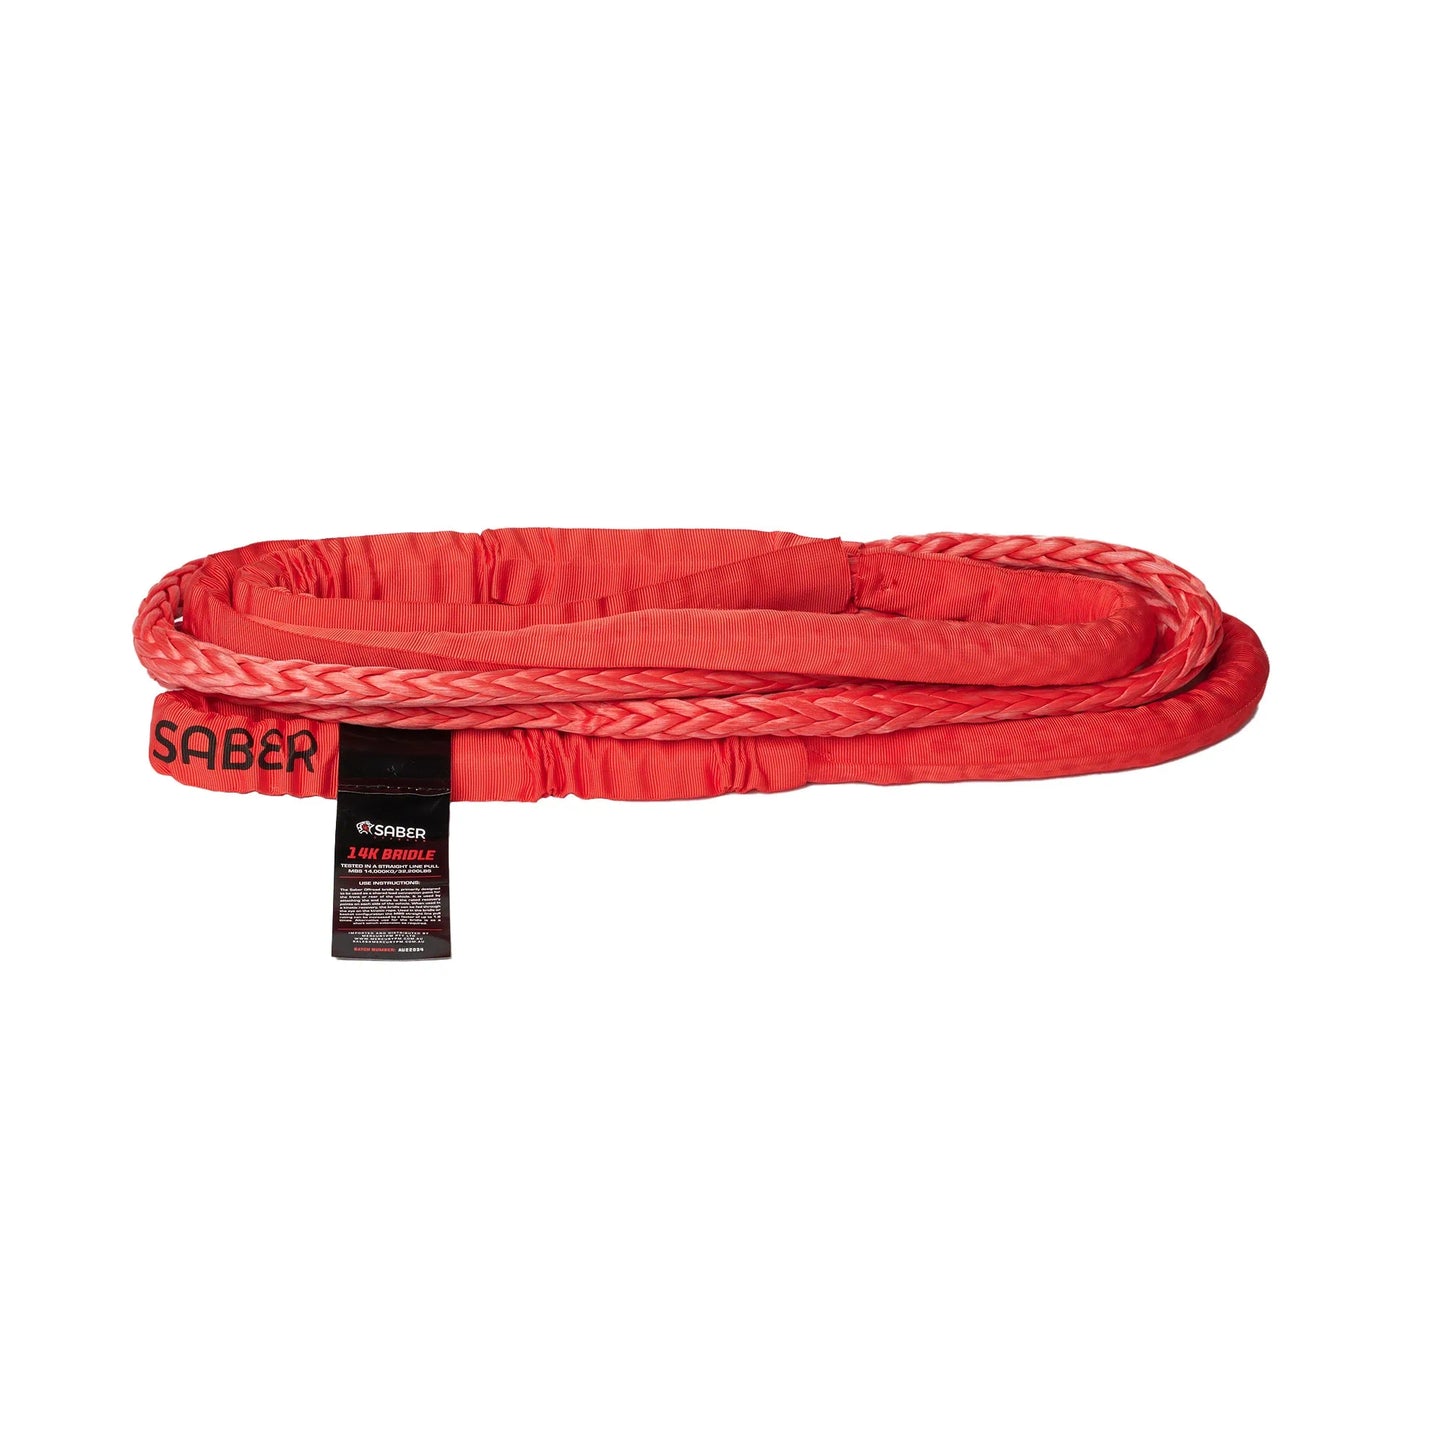 Saber Offroad - 14mm Red Bridle with Red Sheath -